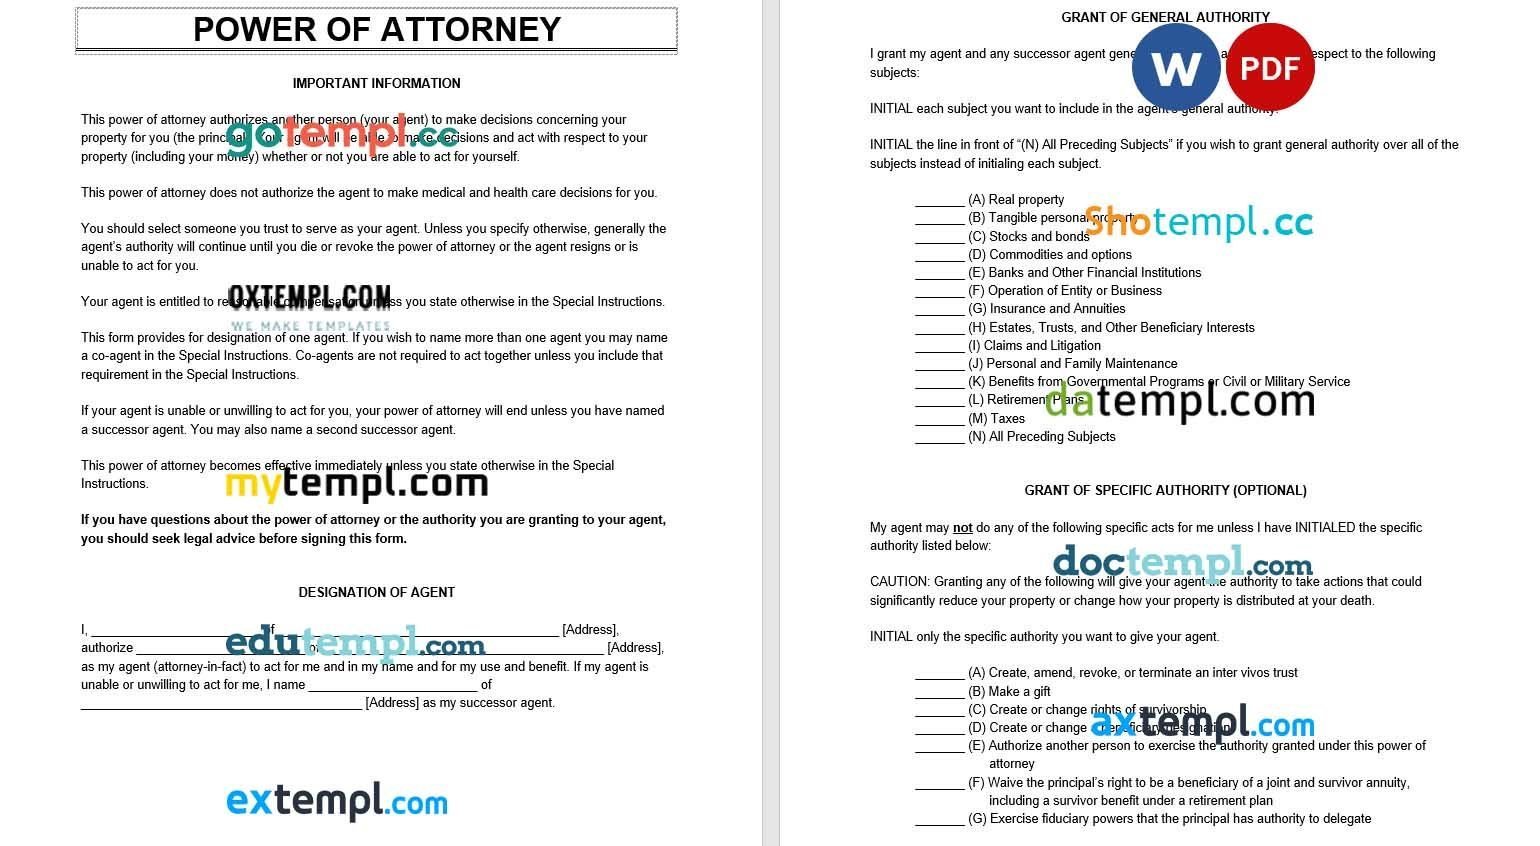 Power of Attorney example, fully editable